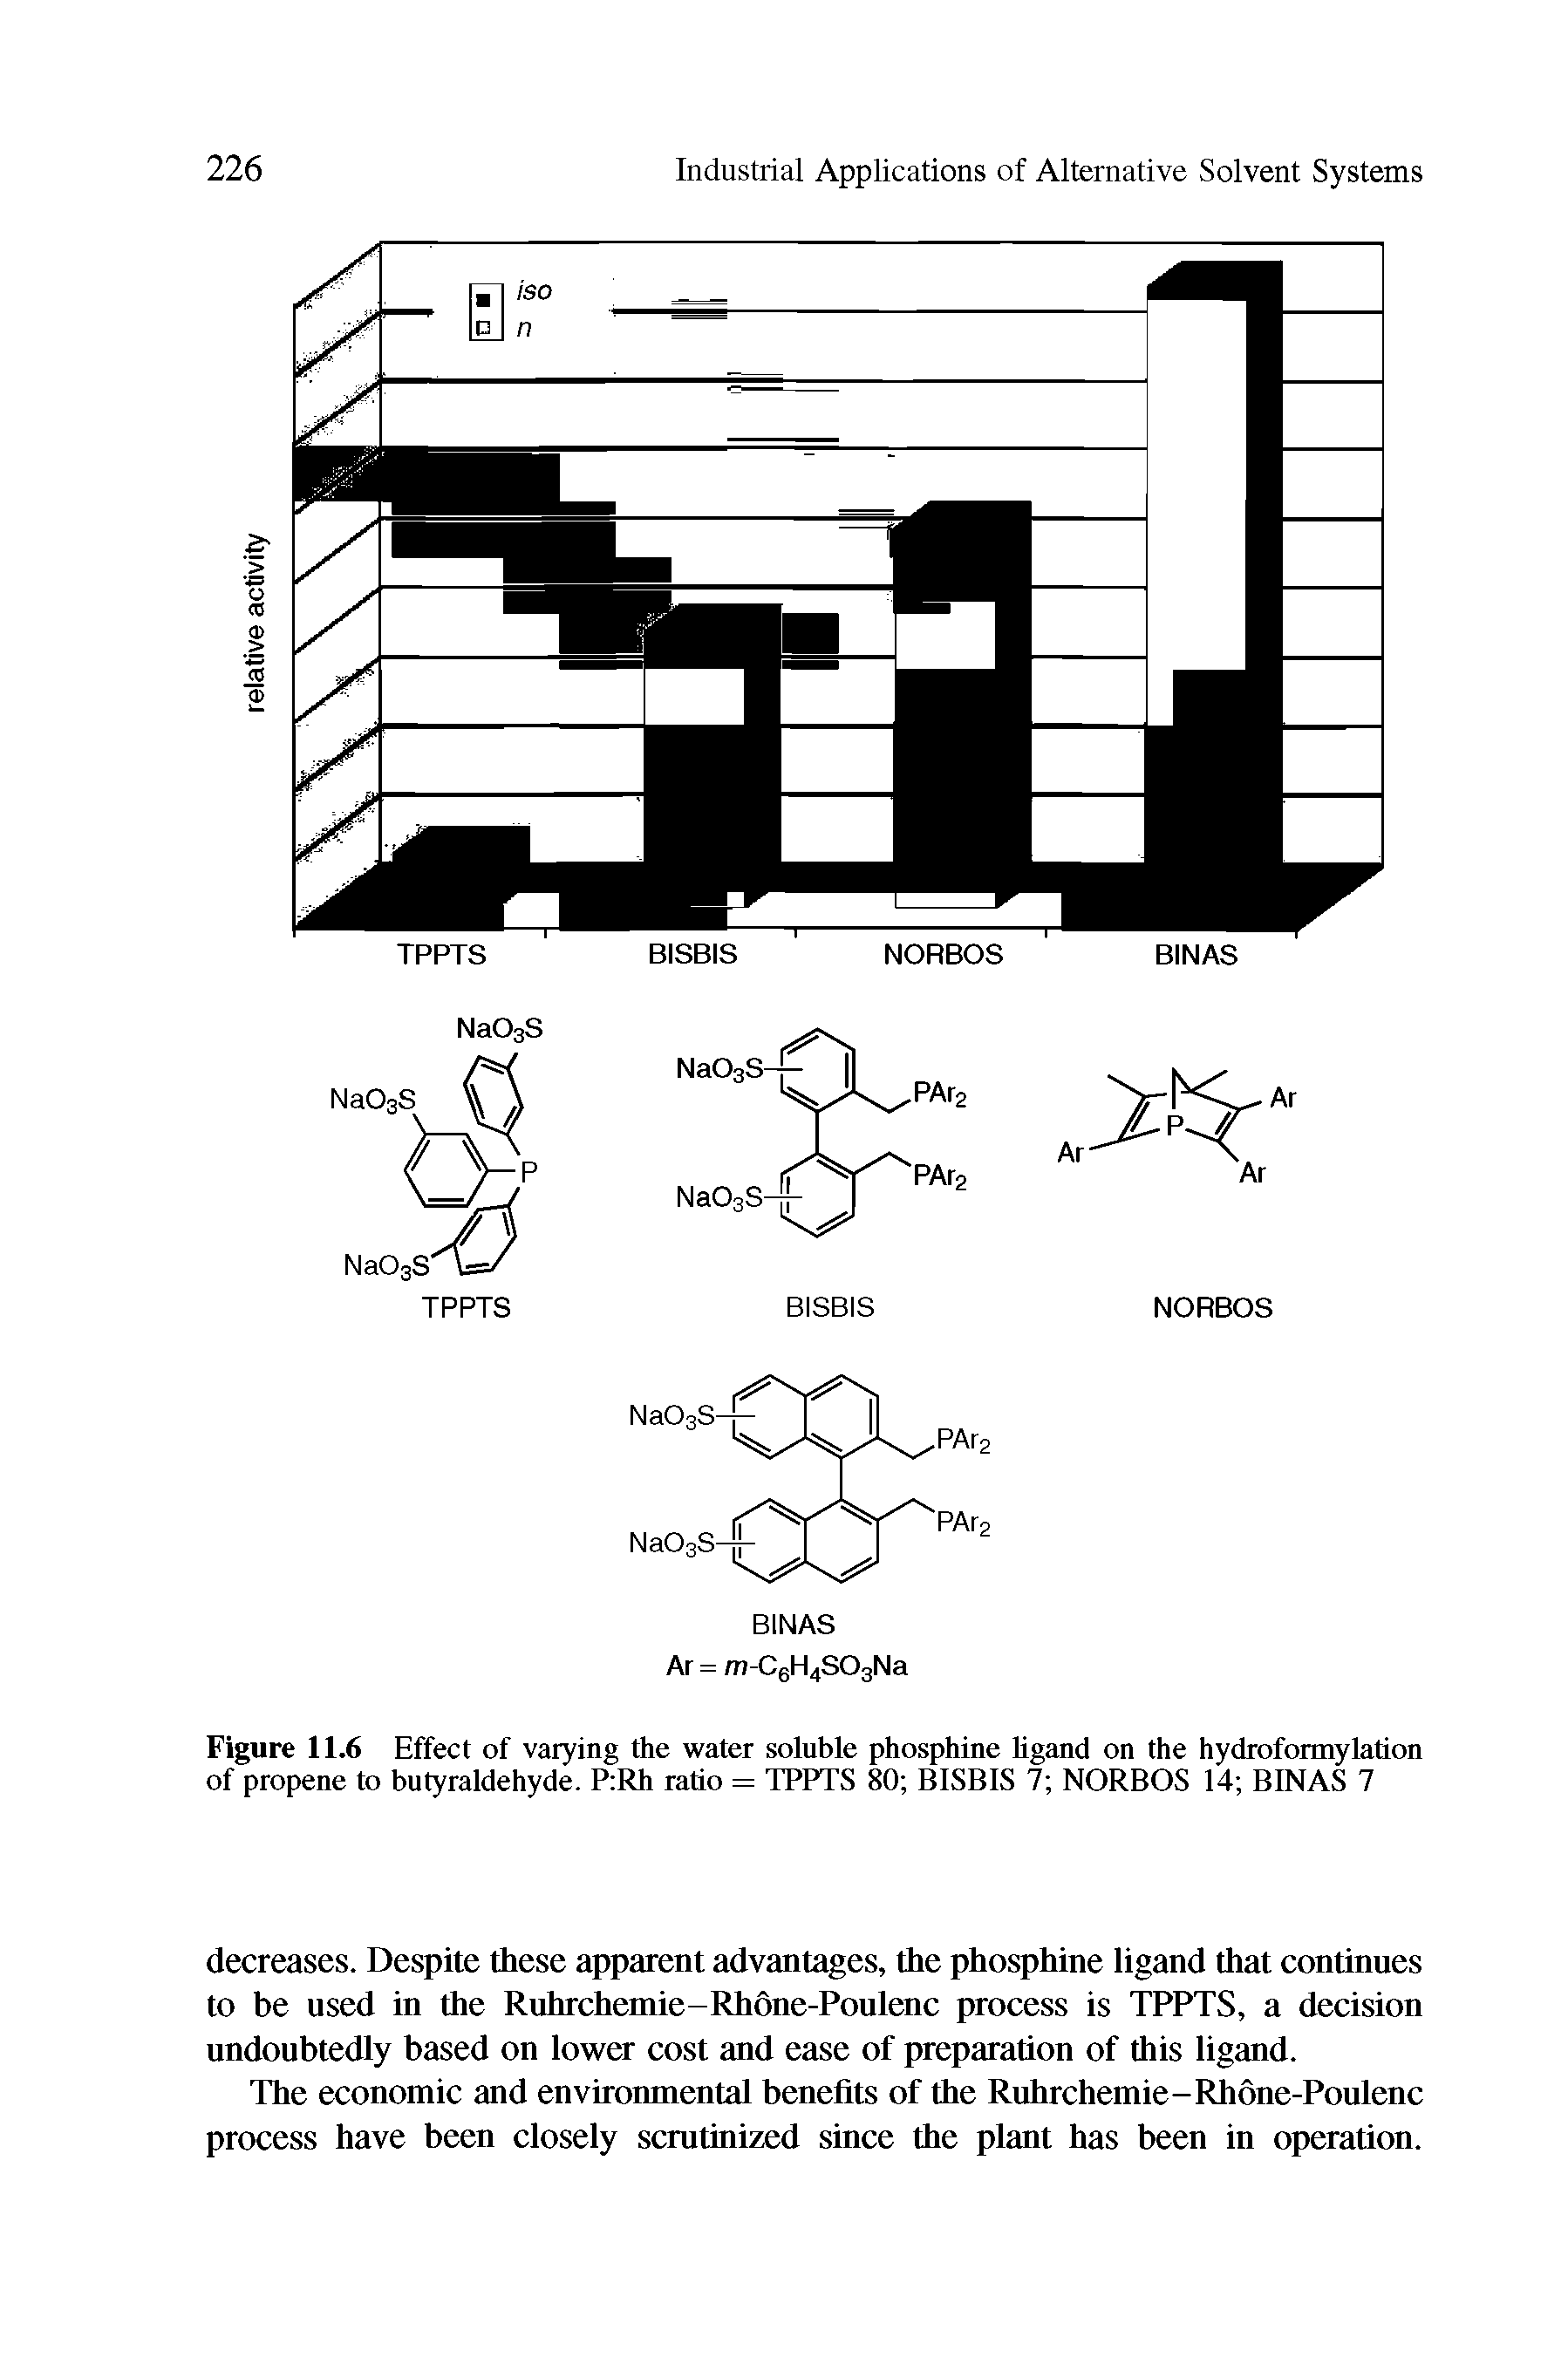 Figure 11.6 Effect of varying the water soluble phosphine ligand on the hydroformylation of propene to butyraldehyde. P Rh ratio = TPPTS 80 BISBIS 7 NORBOS 14 BINAS 7...